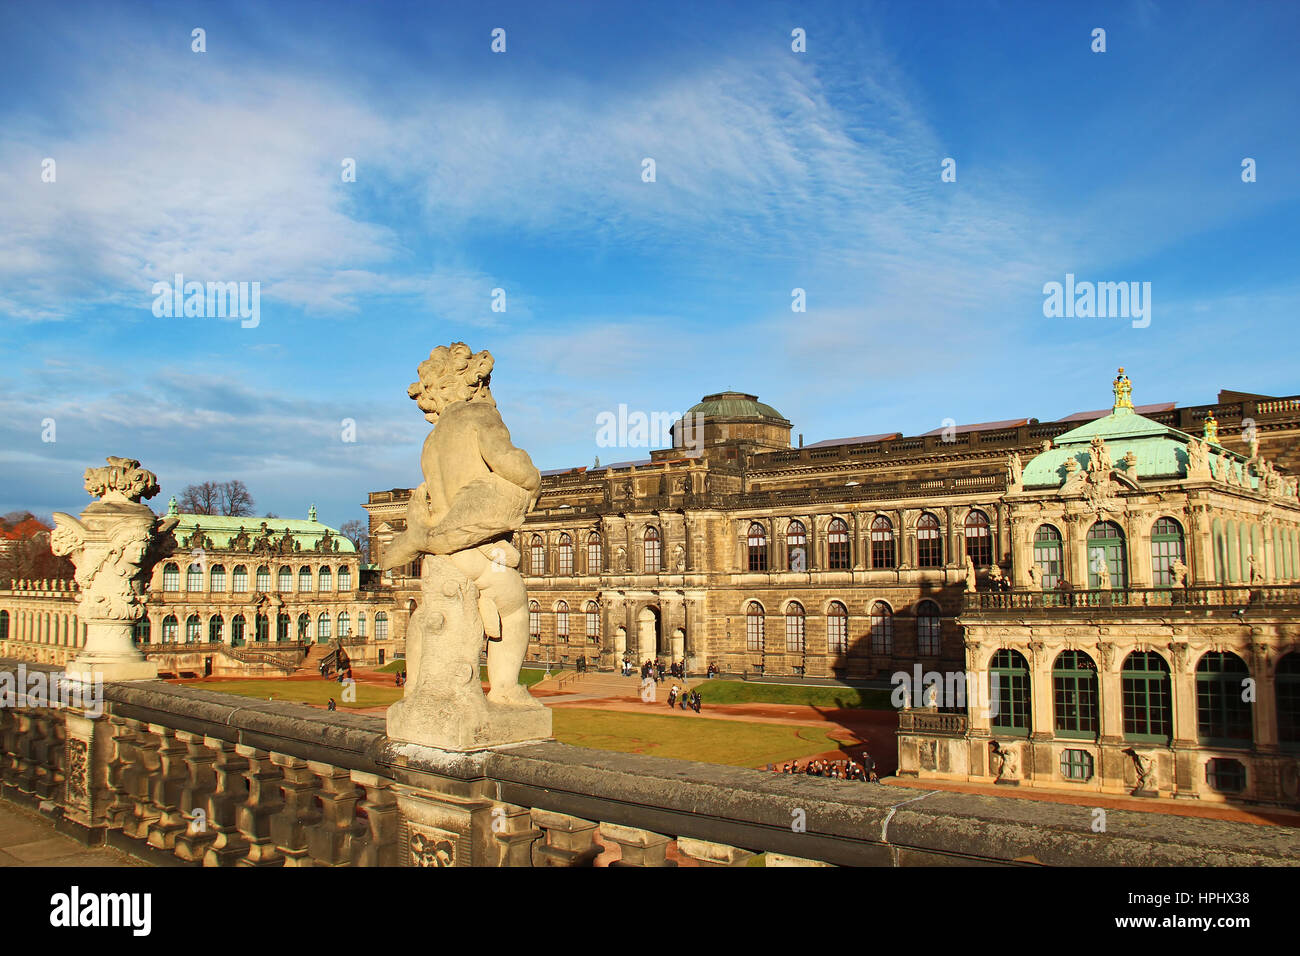 Zwinger Palace in Dresden (Dresdner Zwinger), Germany Stock Photo